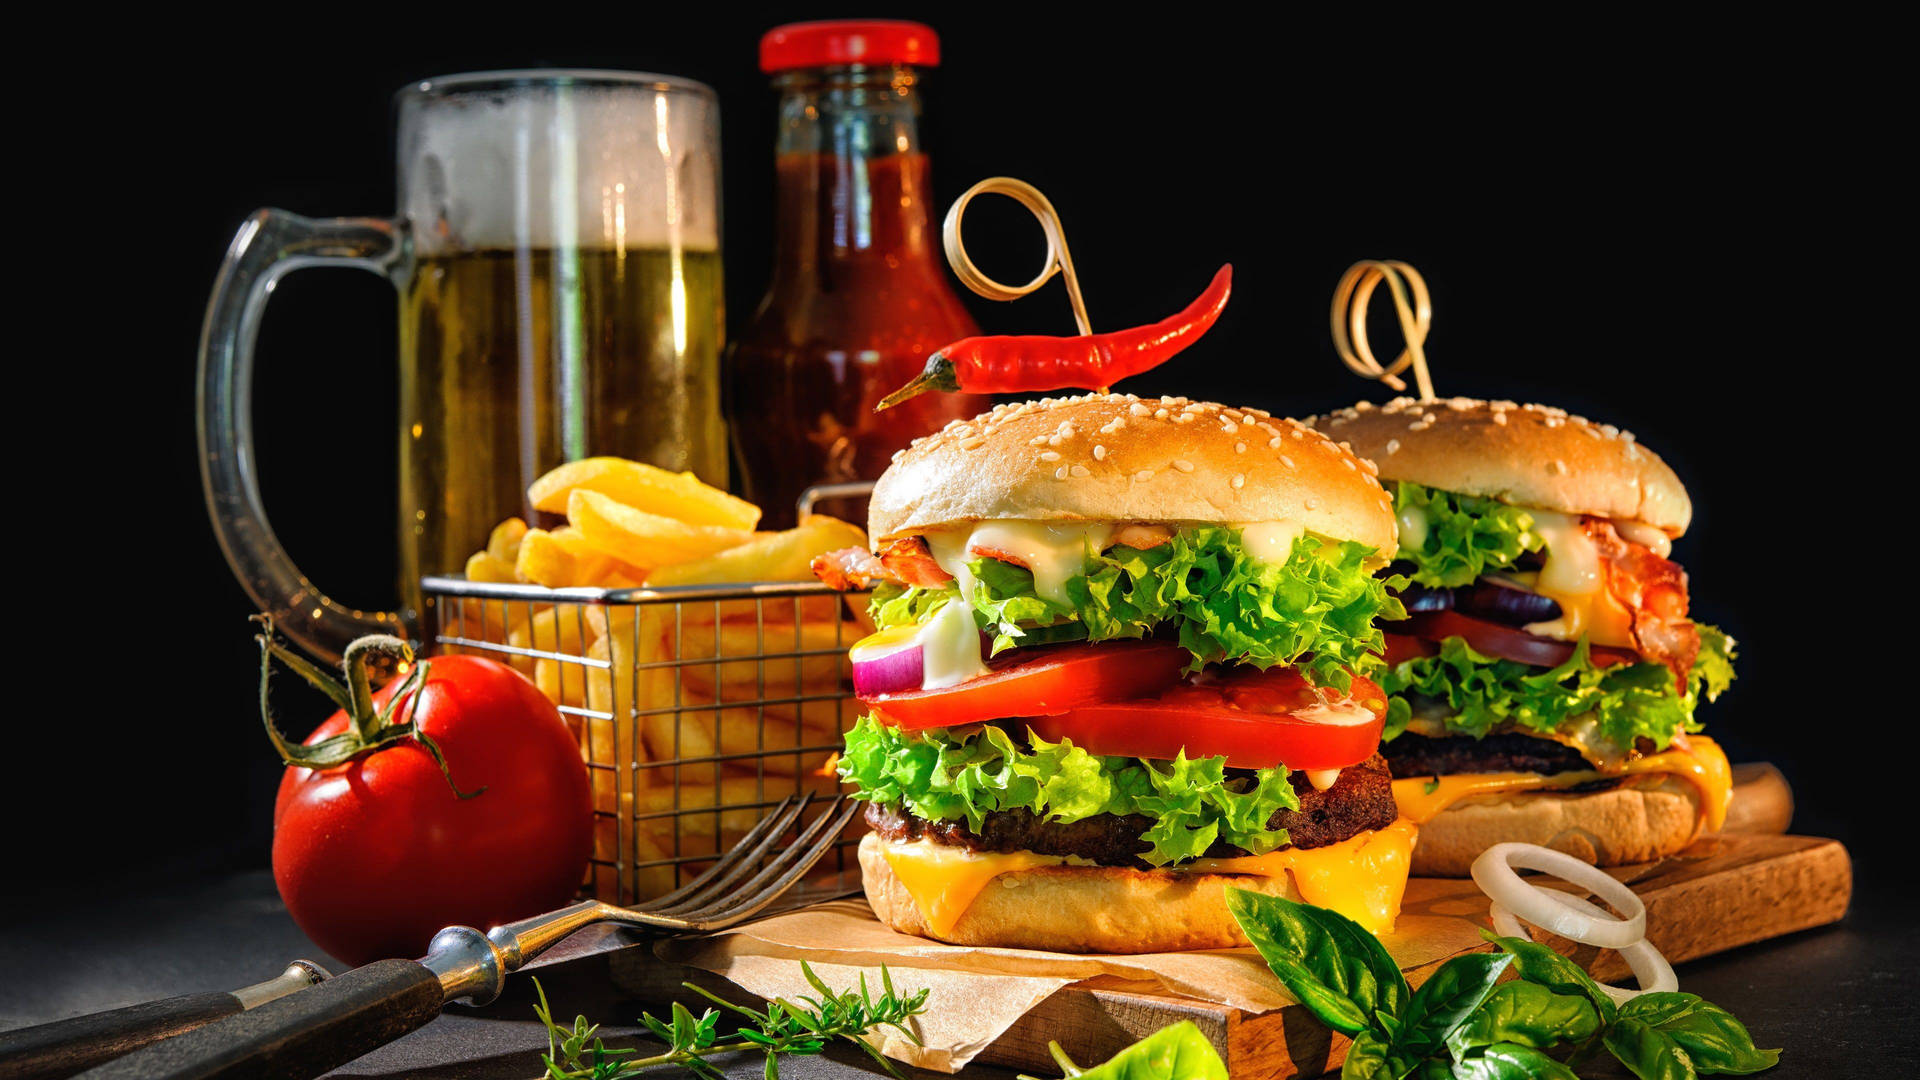 Appetizing Cheeseburgers With Beer, Fries And Tomato Wallpaper